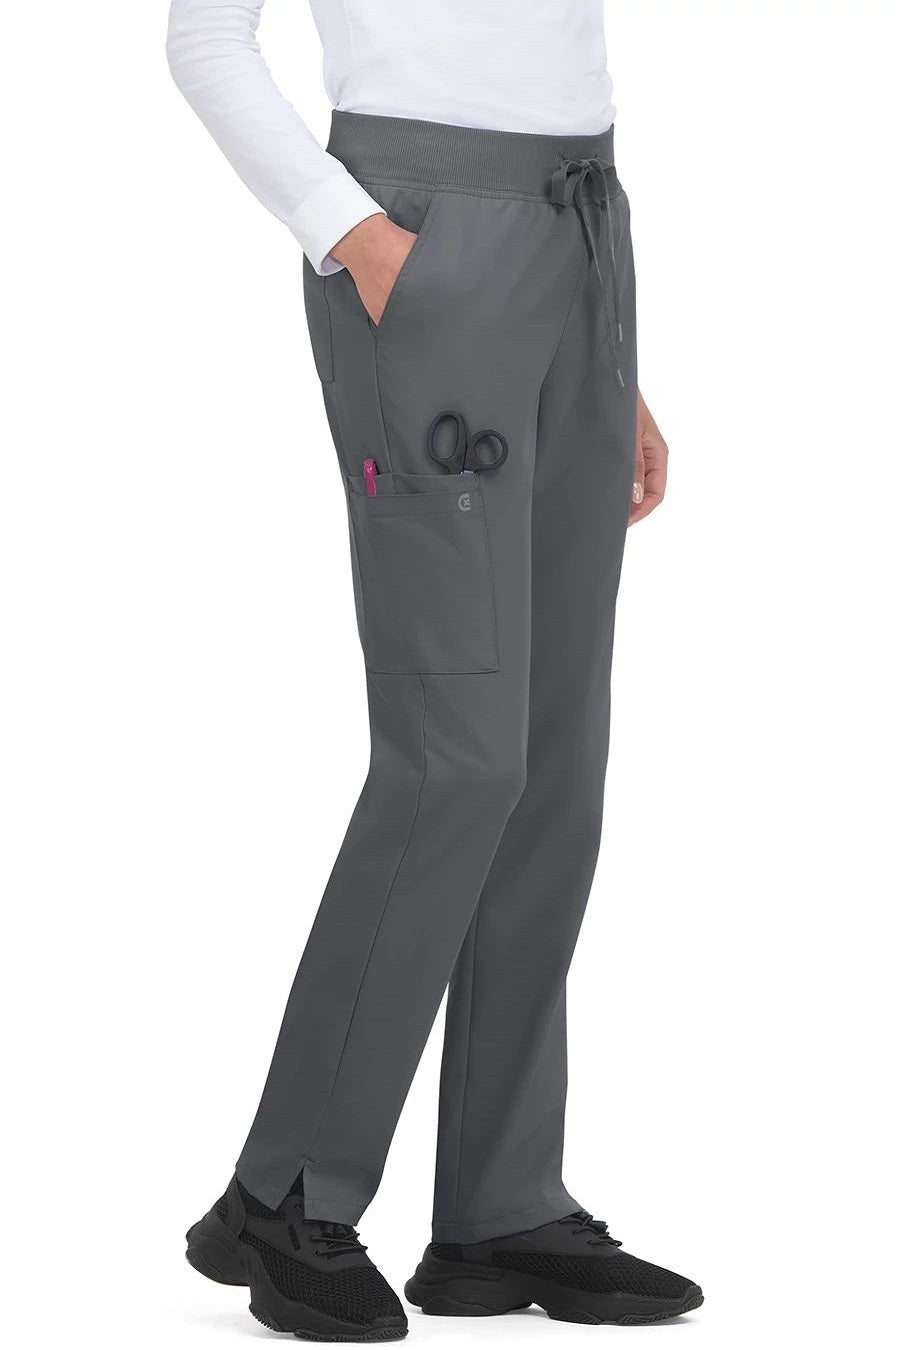 koi Scrub Pants Cureology Atria in Black at Parker's Clothing and Shoes.